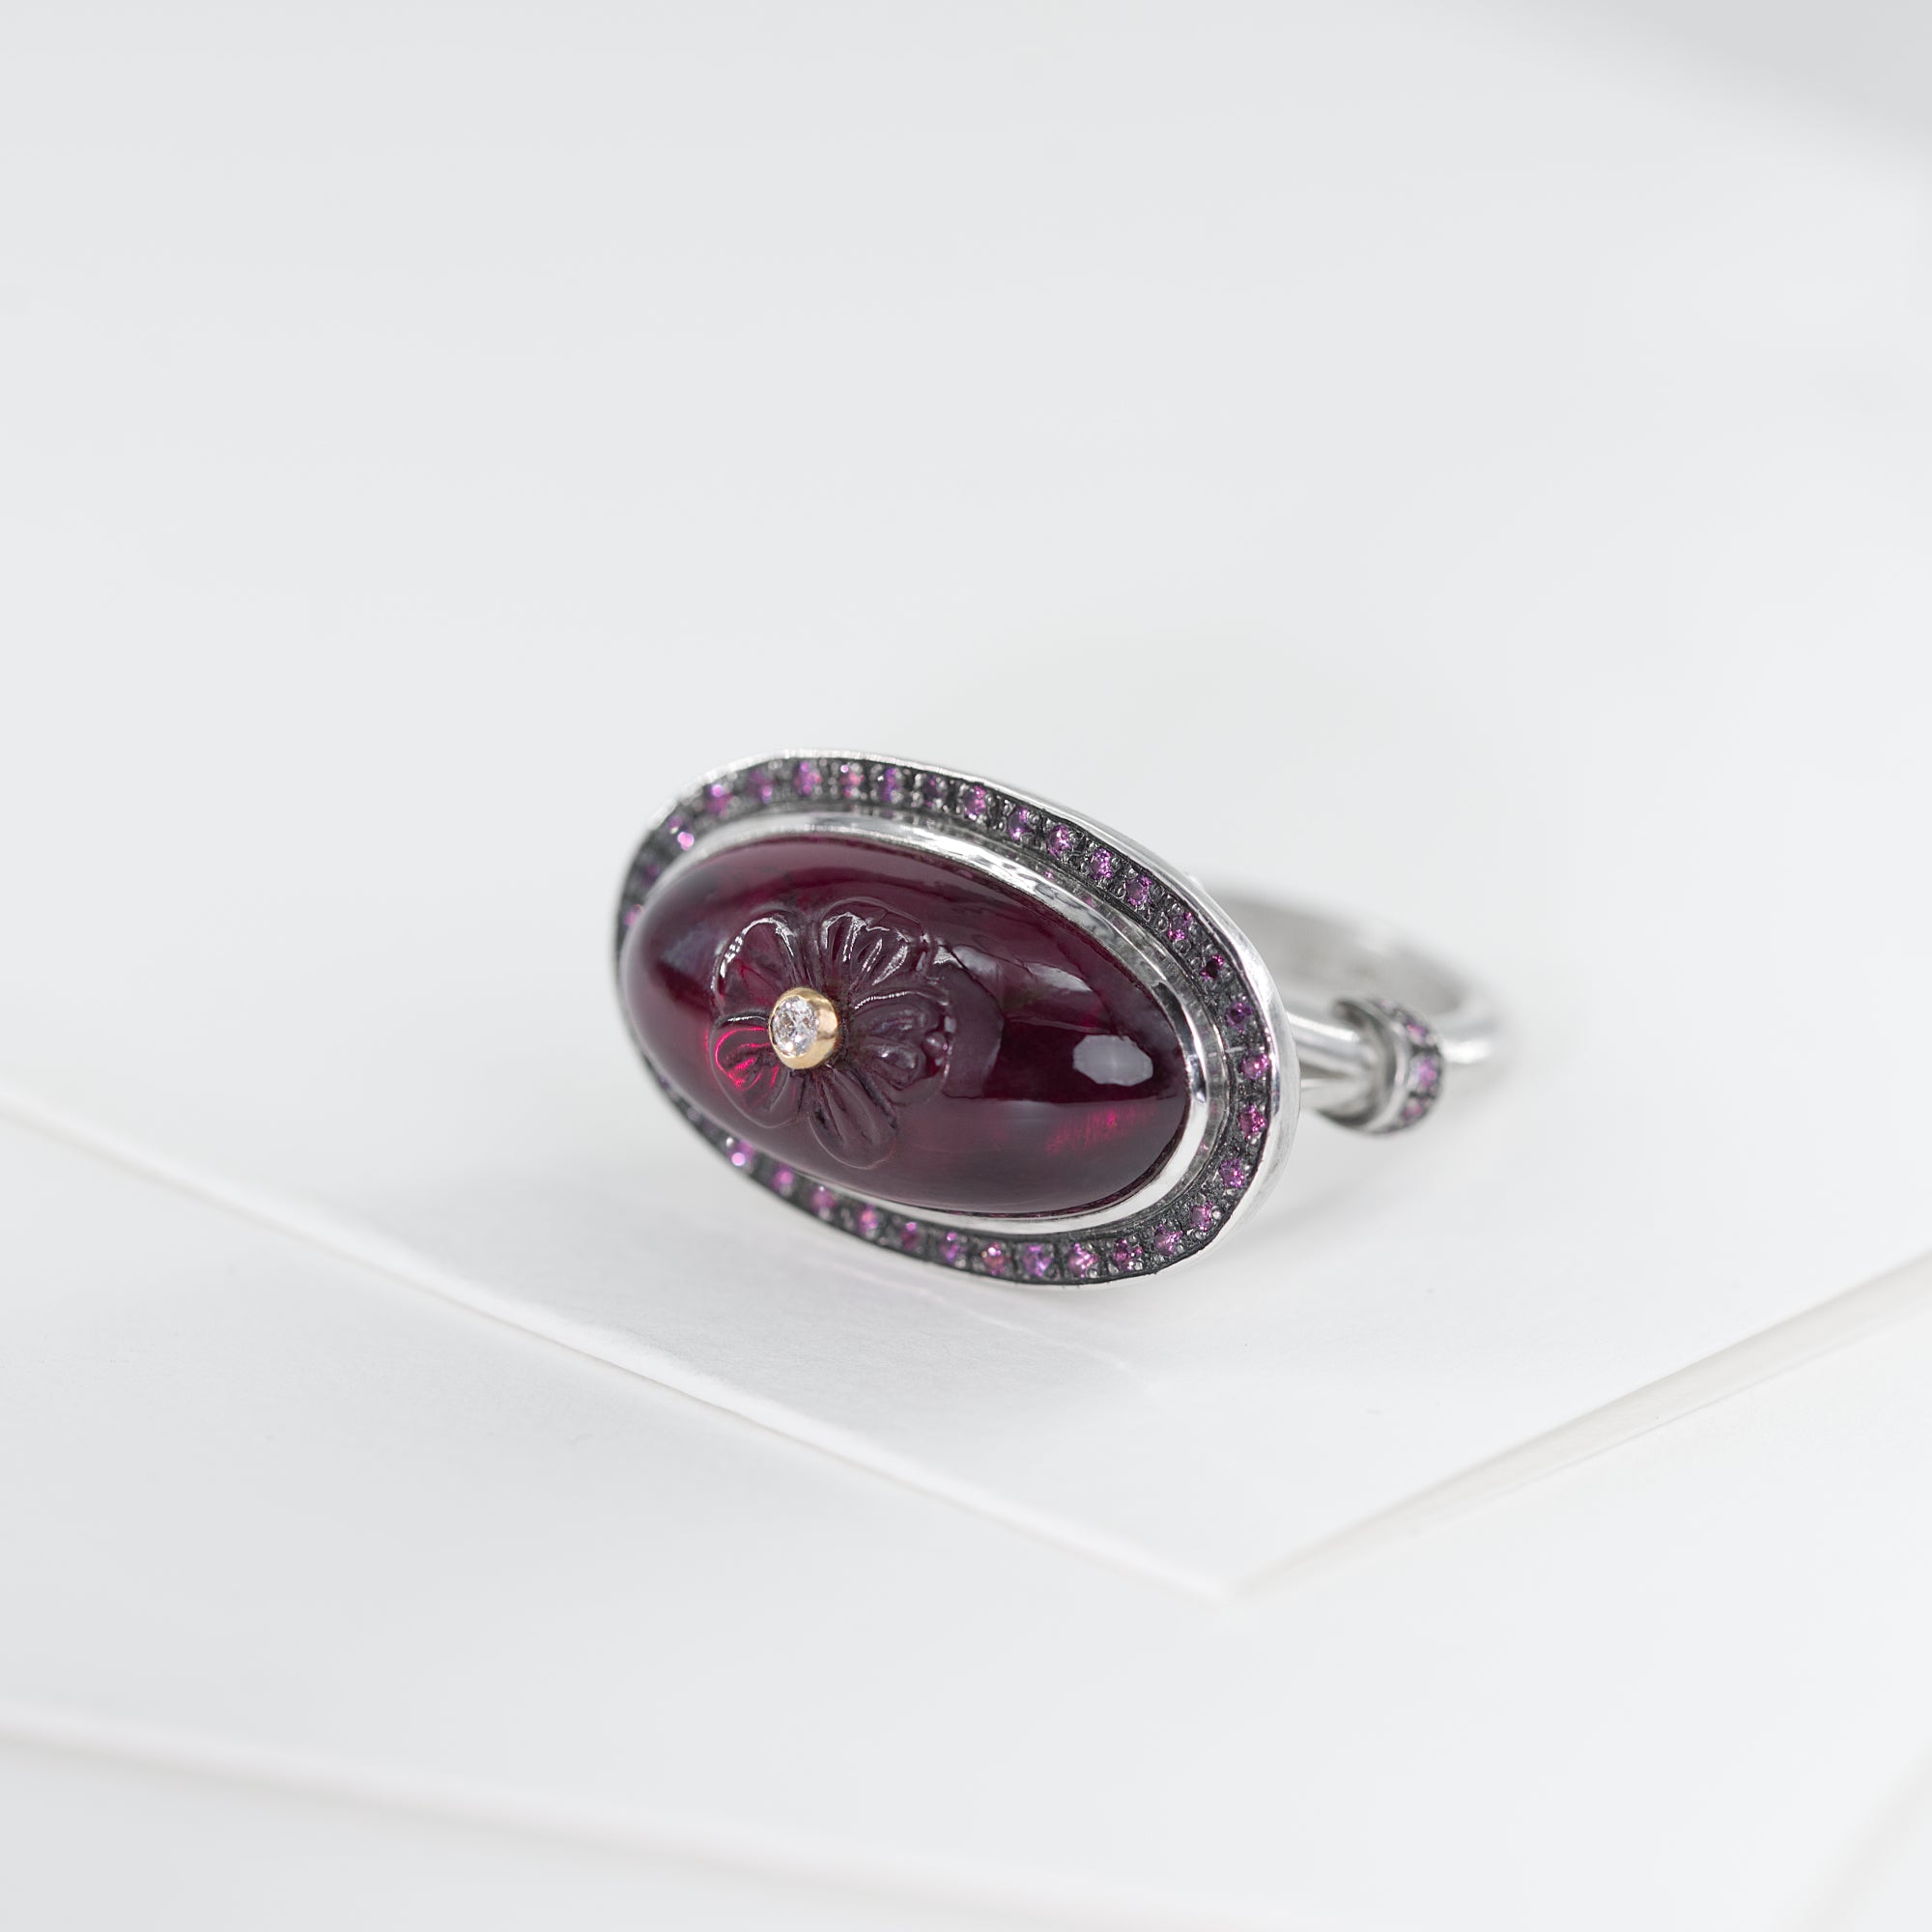 Sterling silver ring with oval rhodolite cabochon. The gemstone is hand carved with flower and adorned with white diamond set in 18K gold. The ring's crown is finished with halo of rhodolites.